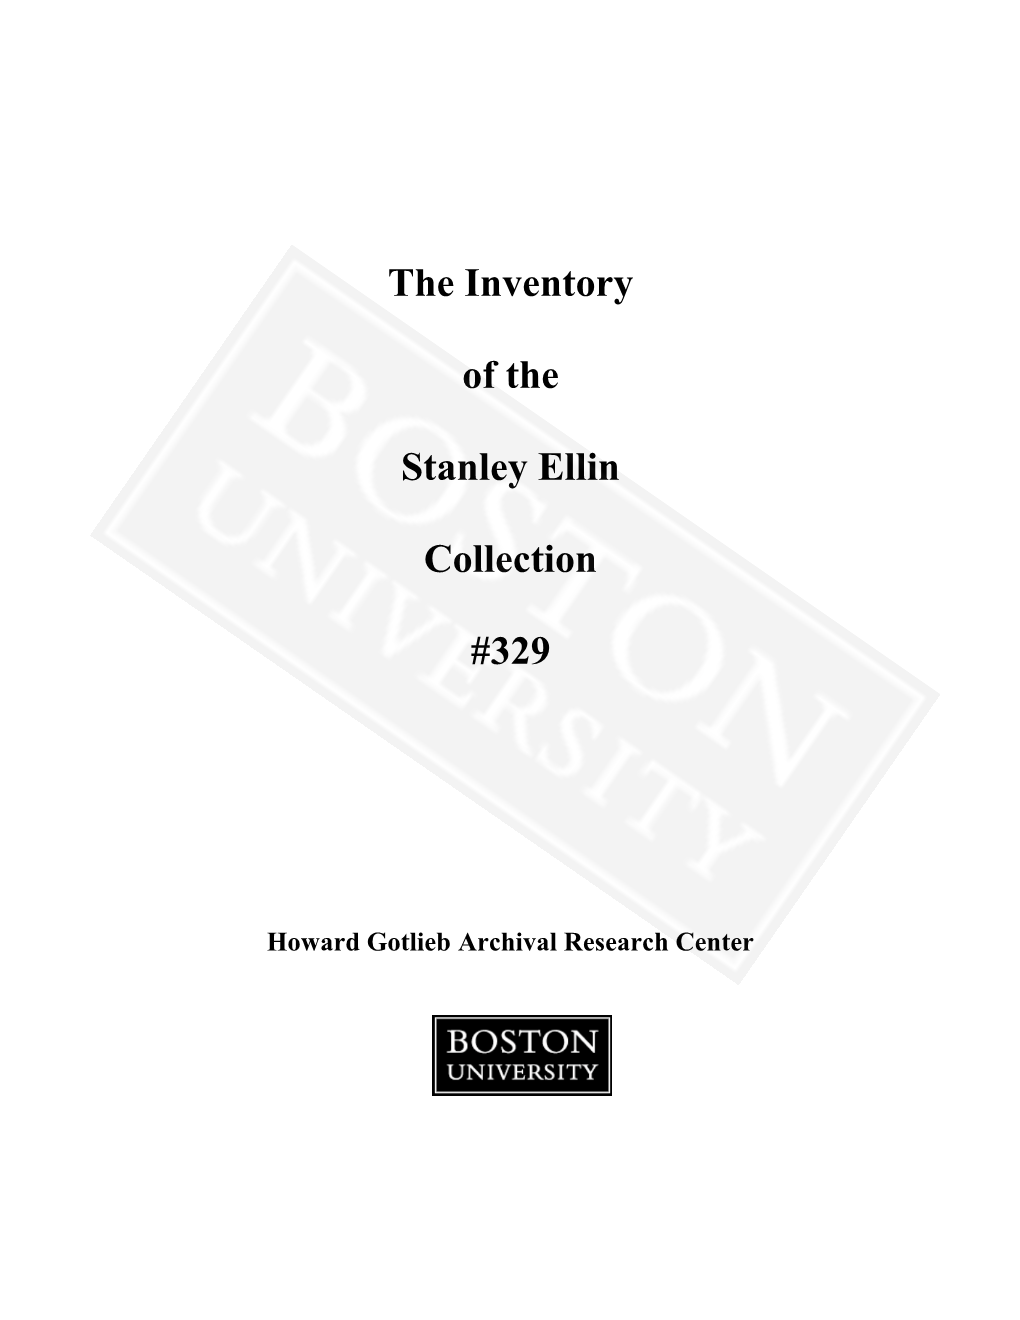 The Inventory of the Stanley Ellin Collection #329